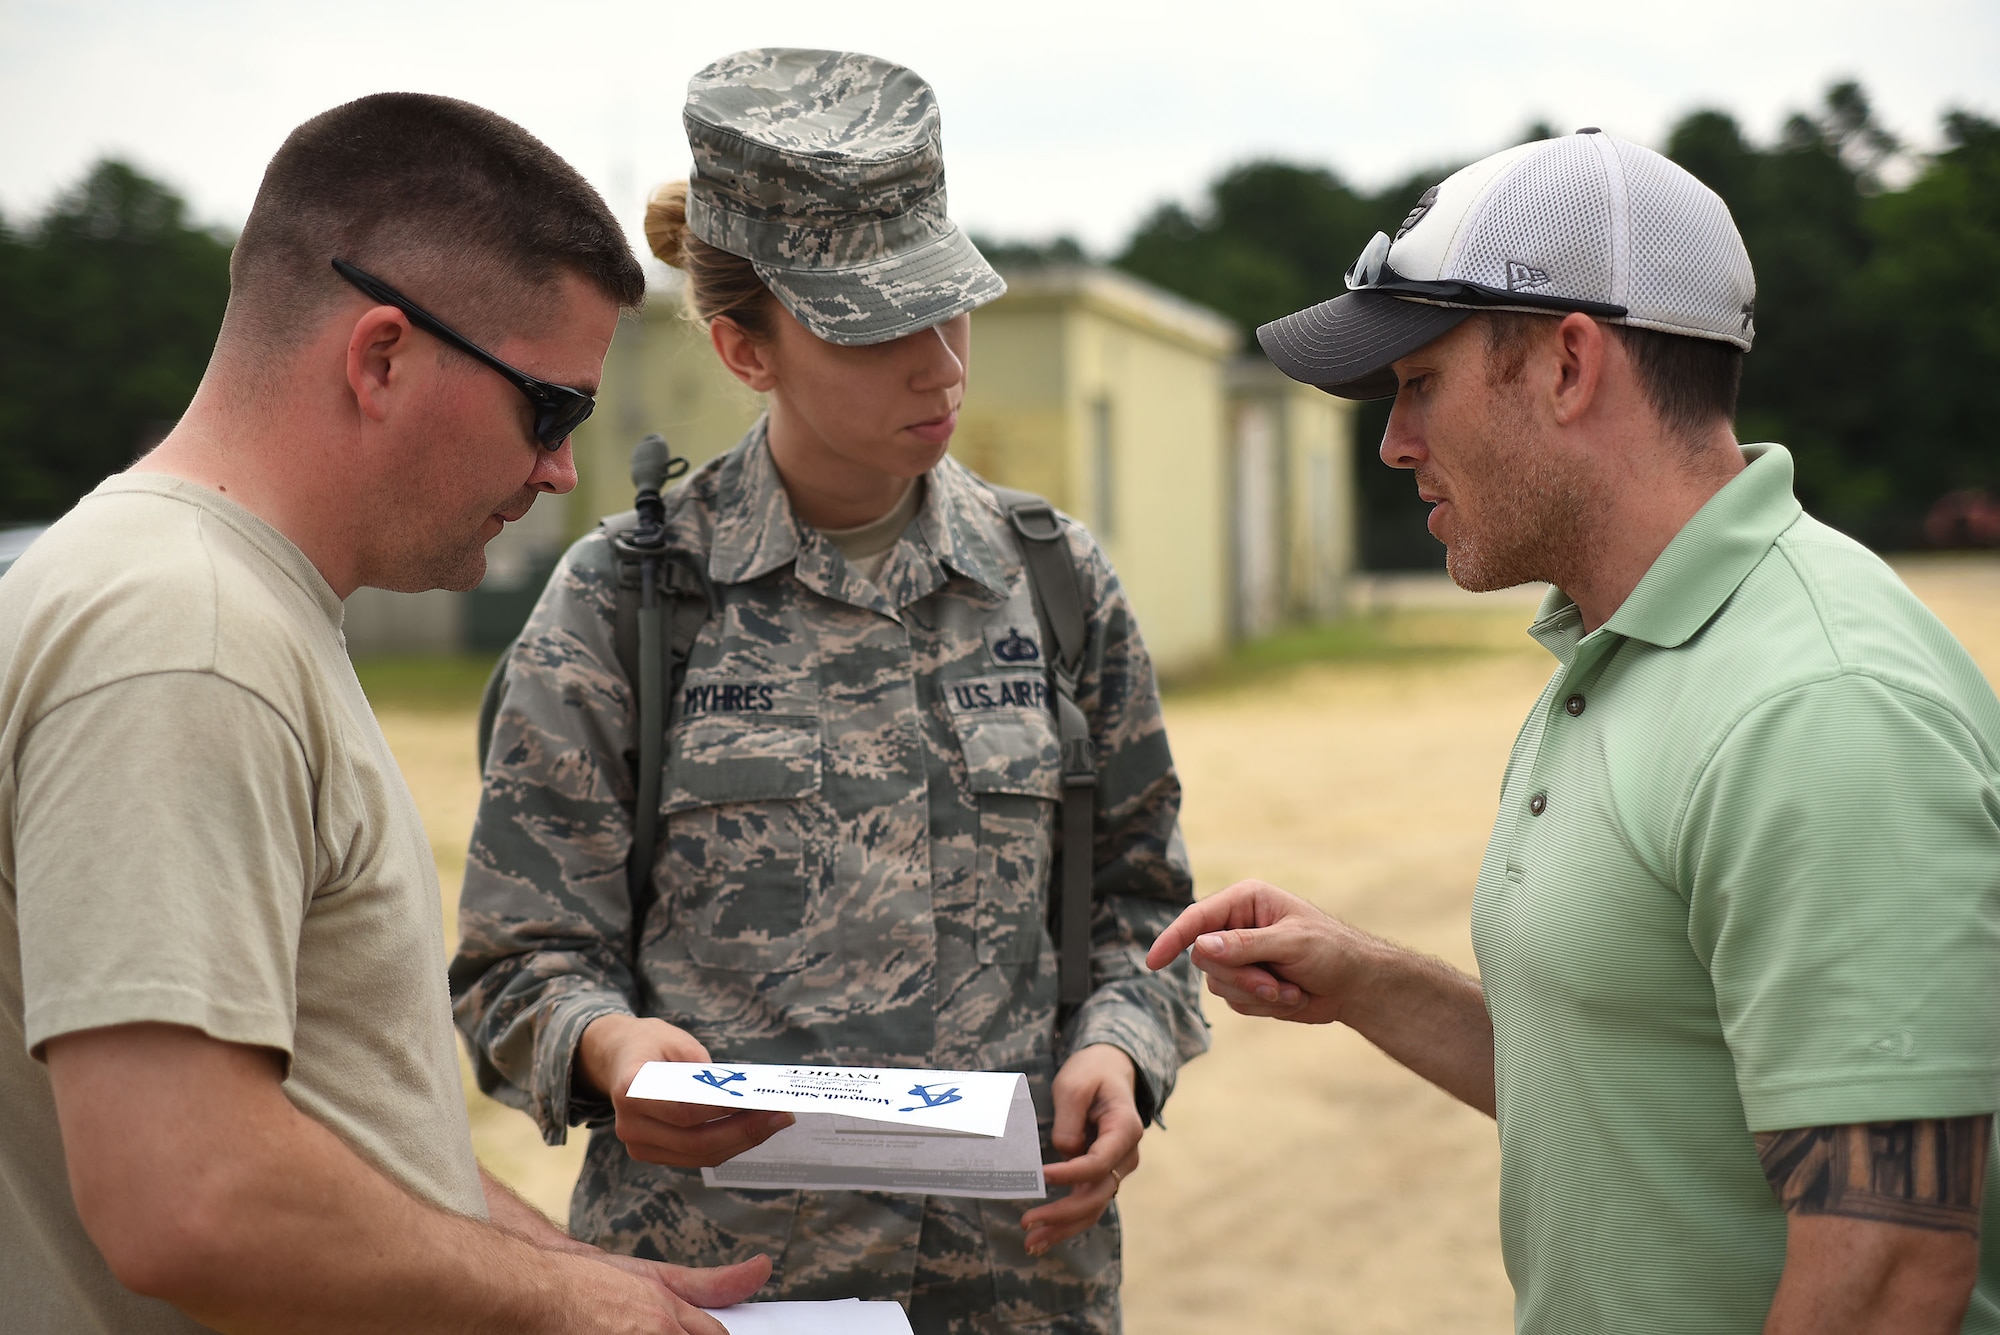 Master Sgt. Kevin Eberlin(right), executive assistant to the U.S. Air Force Expeditionary Center command chief and a role player in Turbo Distribution 15-7 as a host nation airfield manager, discusses an invoice for supplies with Technical Sgt. William Silvers(left) and Staff Sgt. Heather Myhres(center), both from the 821st Contingency Response Group during TD 15-7 at Joint Base McGuire-Dix-Lakehurst, New Jersey, July 21, 2015. Contingency Response units are able to survive and operate with their own equipment, but this tests their ability to also utilize equipment and supplies from the area they deploy to, which provides further sustainability for the units and possible follow-on forces. TD 15-7, a Joint Task Force-Port Opening (JTF-PO) field training exercise, hosted by the U.S. Air Force Expeditionary Center at Joint Base McGuire-Dix-Lakehurst, New Jersey, tests the ability to rapidly deploy and employ a JTF-PO Aerial Port of Debarkation (APOD) enabling capability in direct support to a regional combatant command.(U.S. Air Force photo/Danielle Brooks)